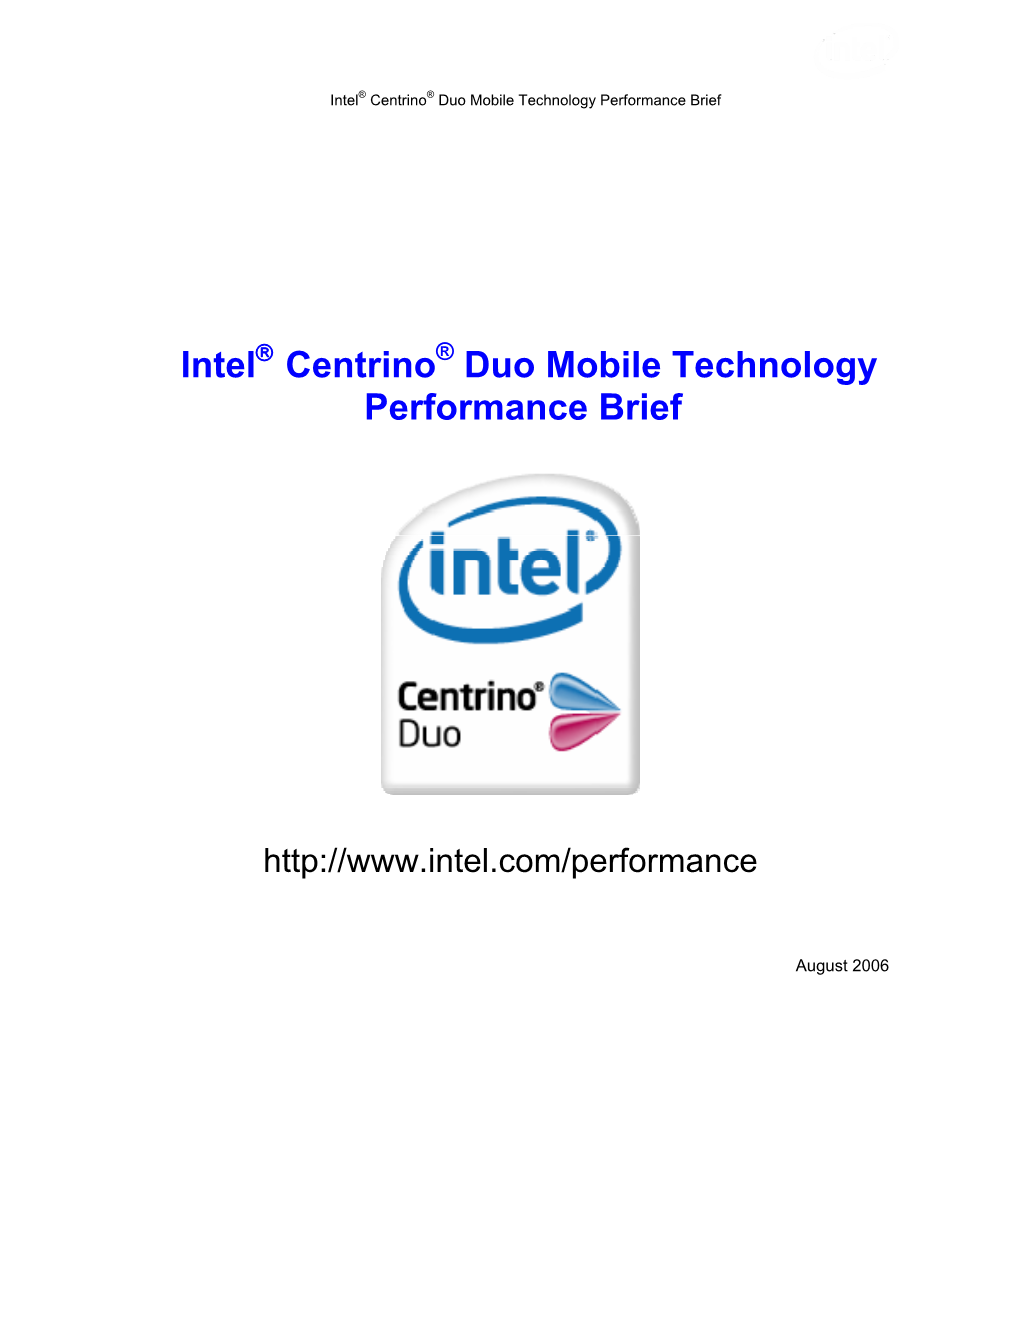 Intel Centrino Duo Mobile Technology Performance Brief